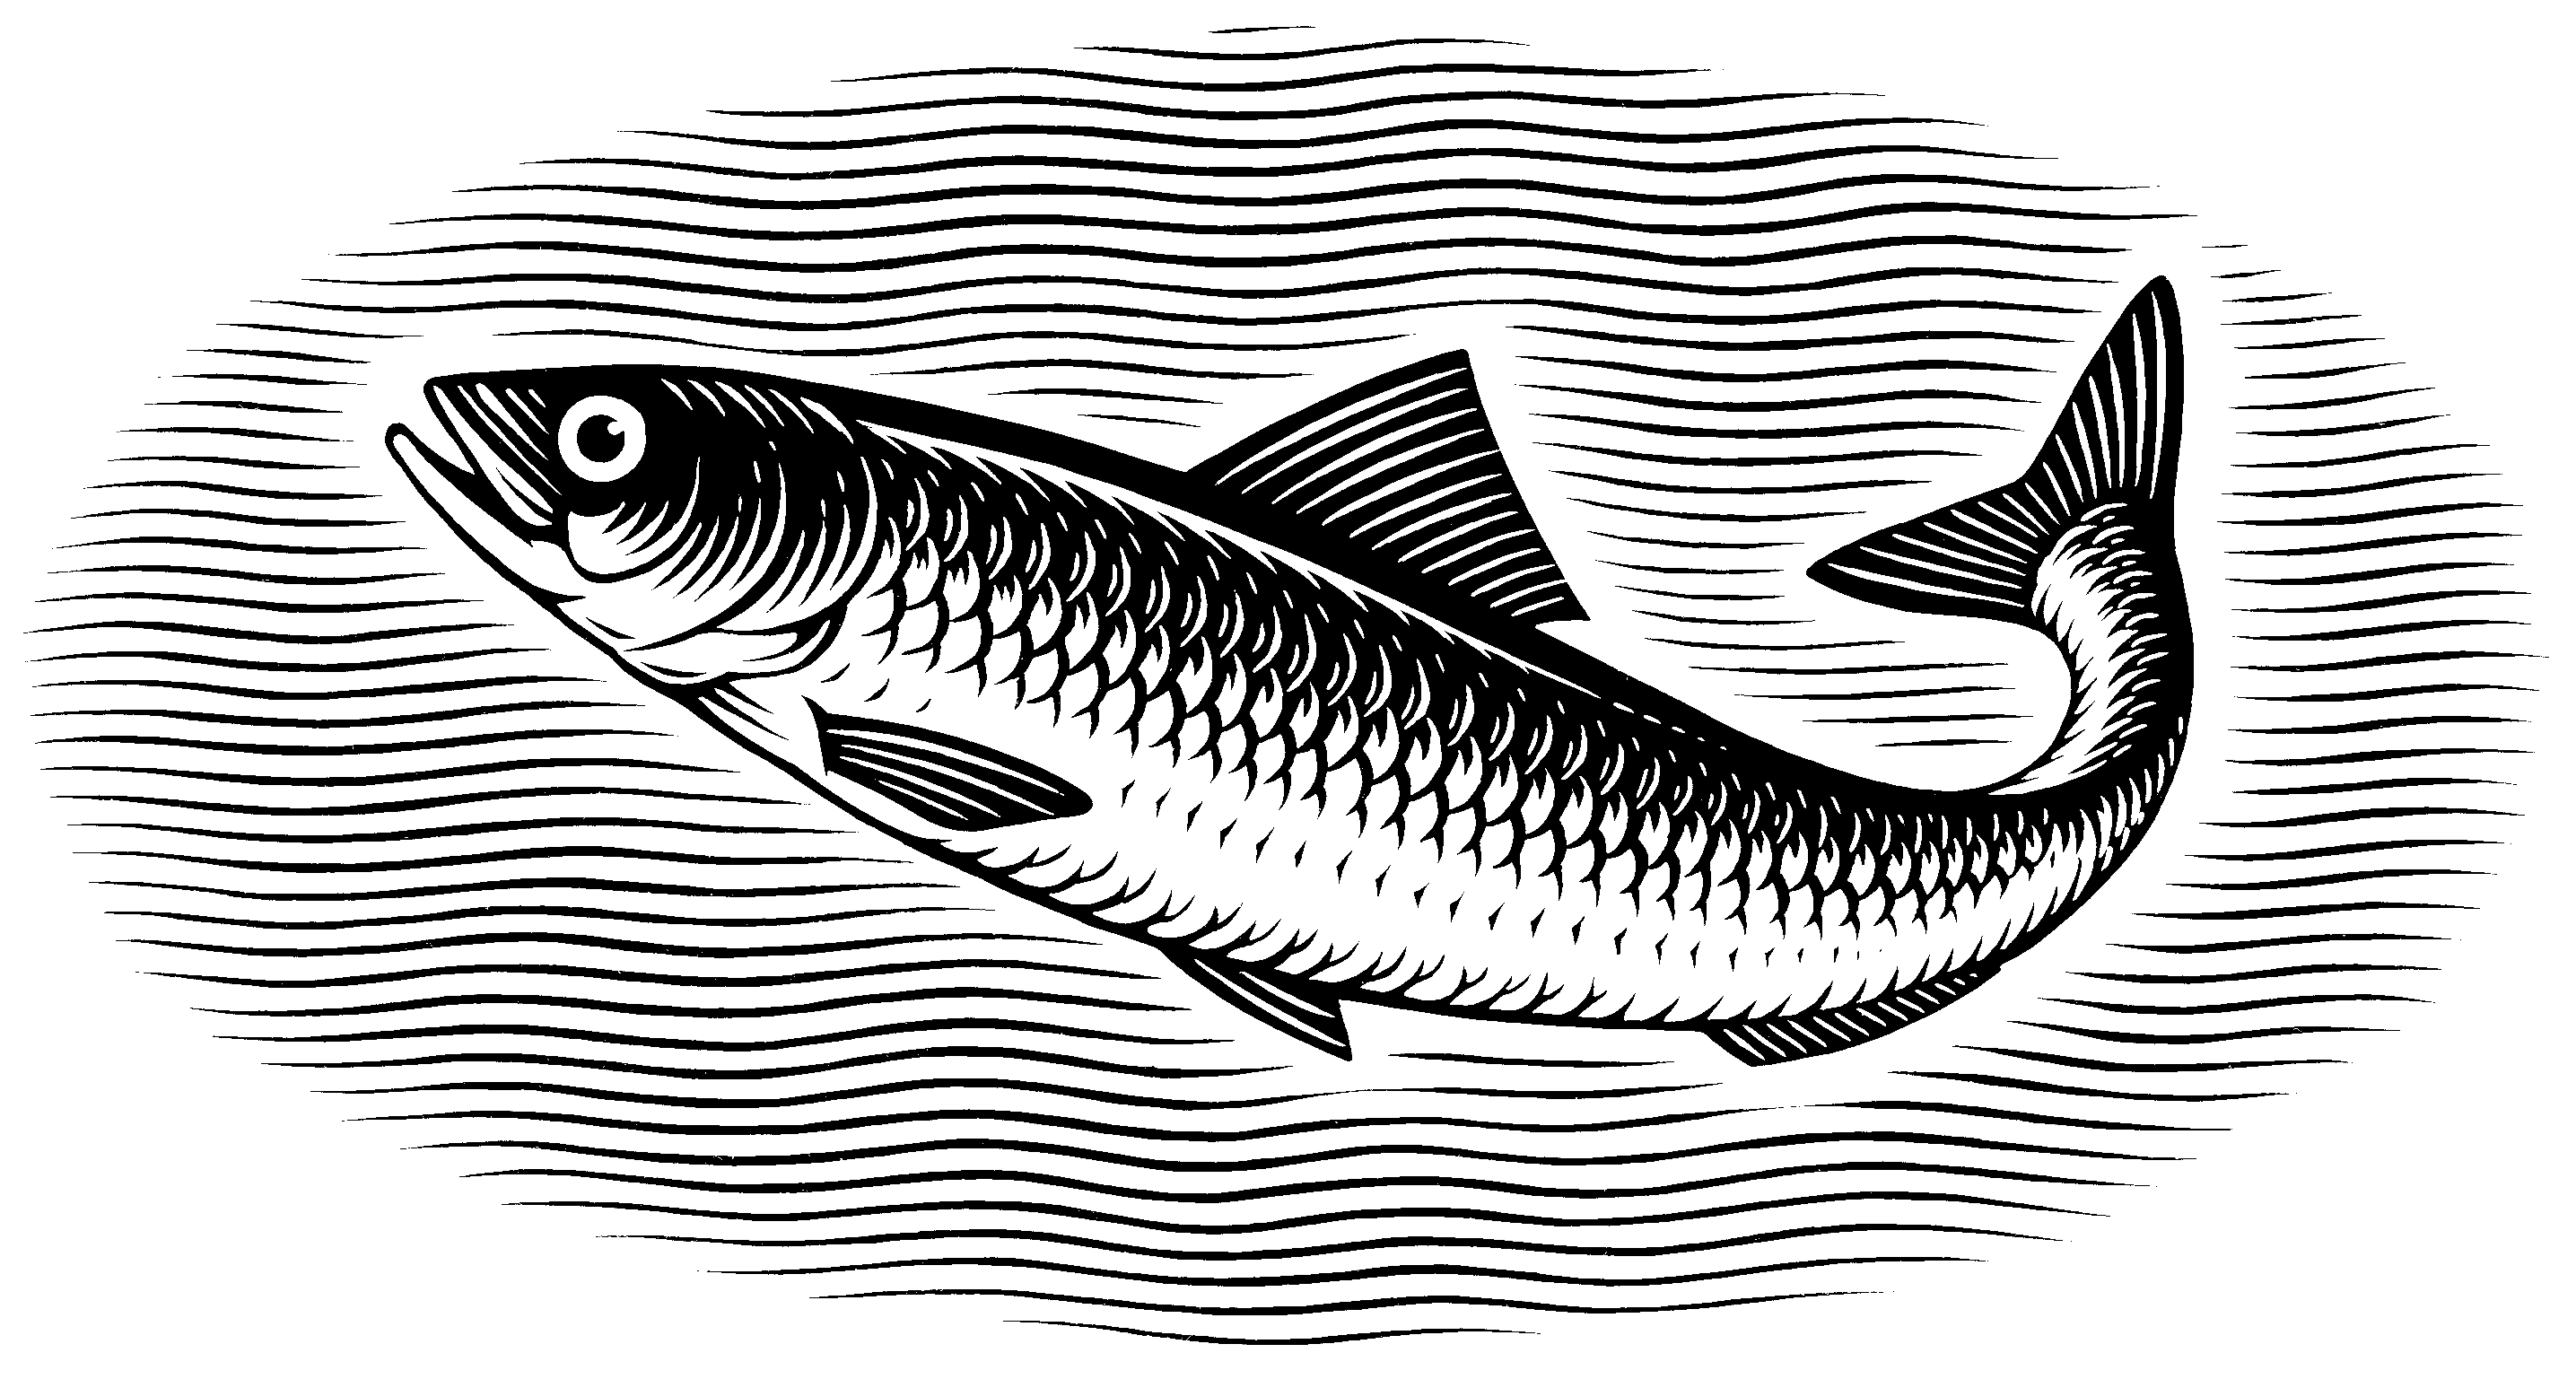 Sardine with Curved Tail Up